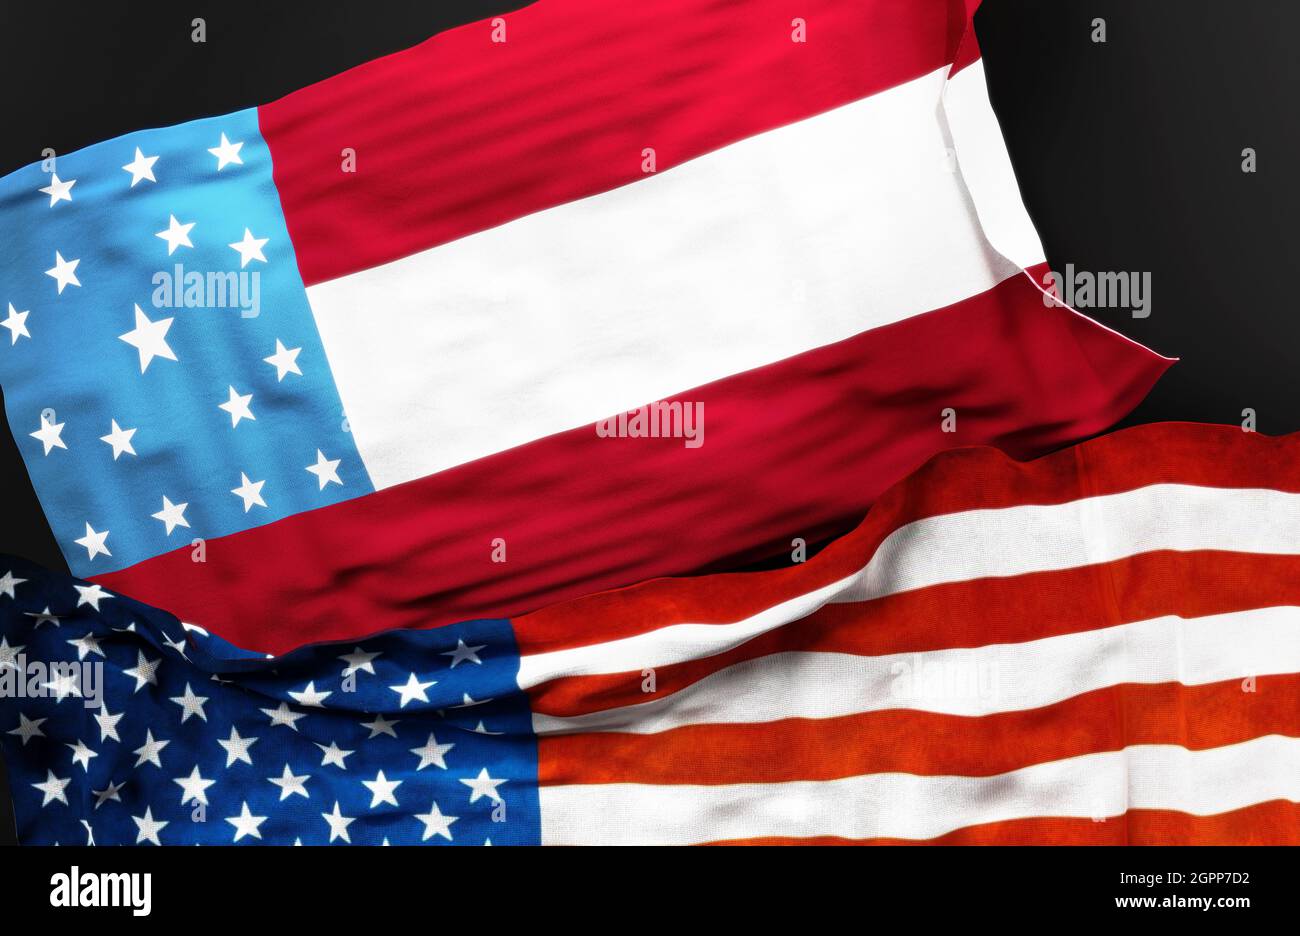 Flag of JP Gillis along with a flag of the United States of America as a symbol of unity between them, 3d illustration Stock Photo